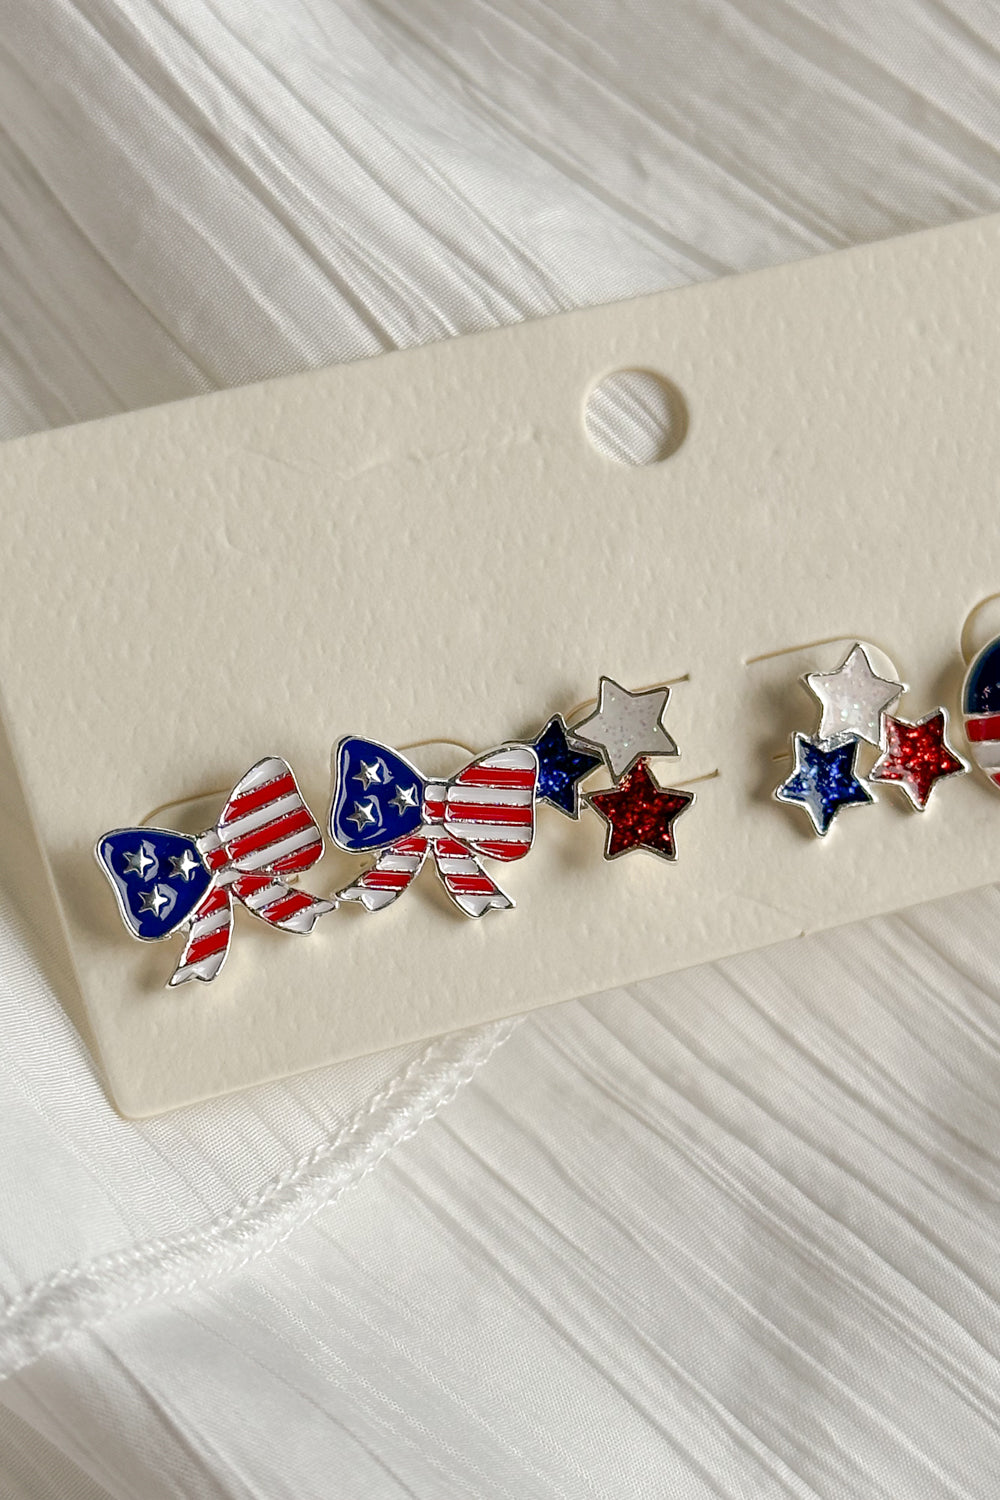 Image shows close-up of bows in Kennedy Stars & Stripes Stud Set that have 3 pairs or studs; bows, circles, and stars. Studs are red white and blue with stripe details.